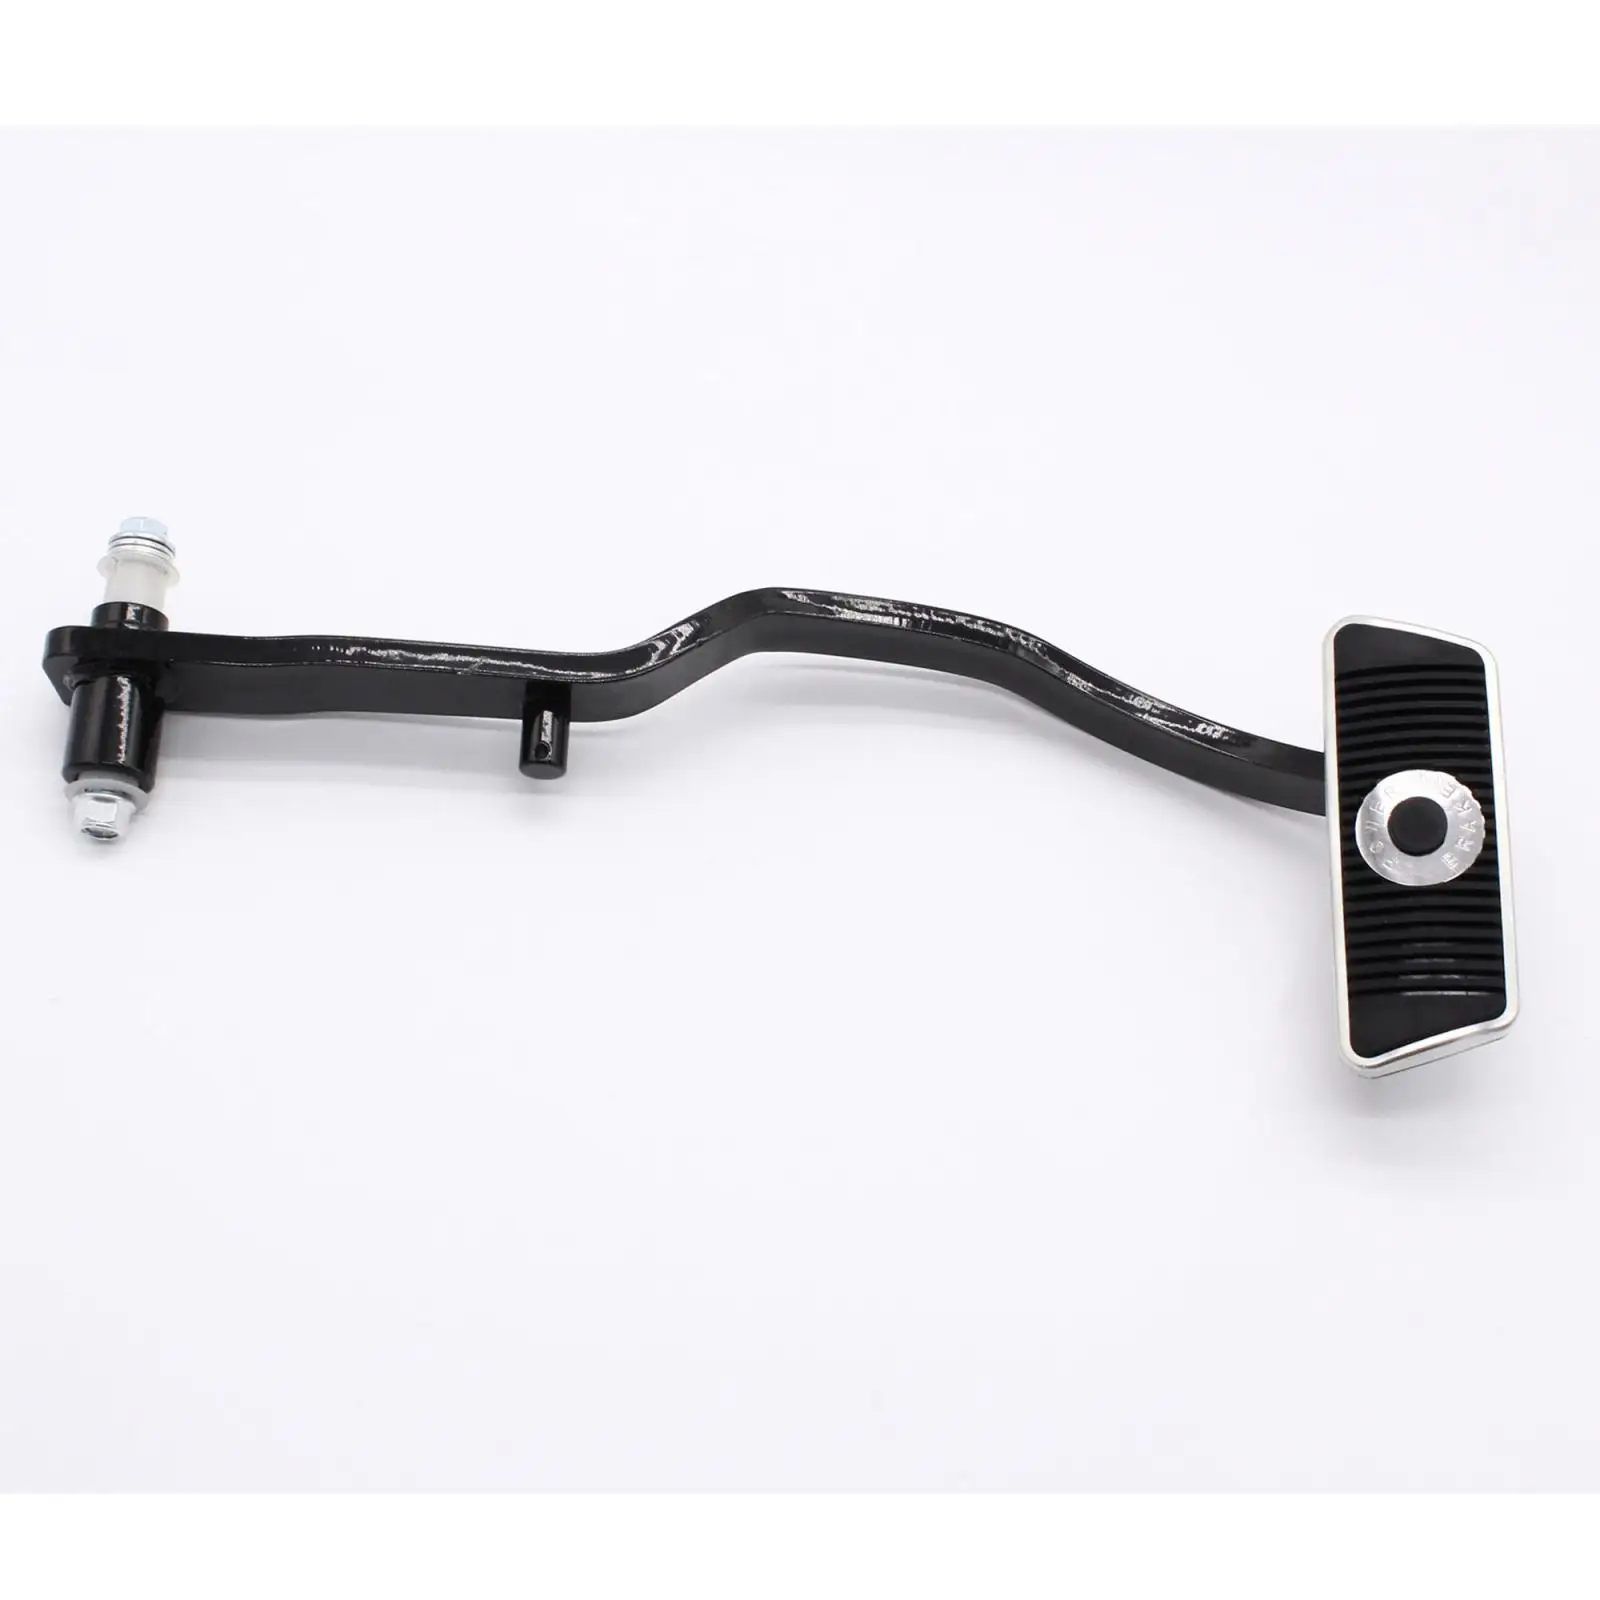 Car Brake Pedal Arm for Automatics Disc Brake B10520 for Ford Mustang High Quality